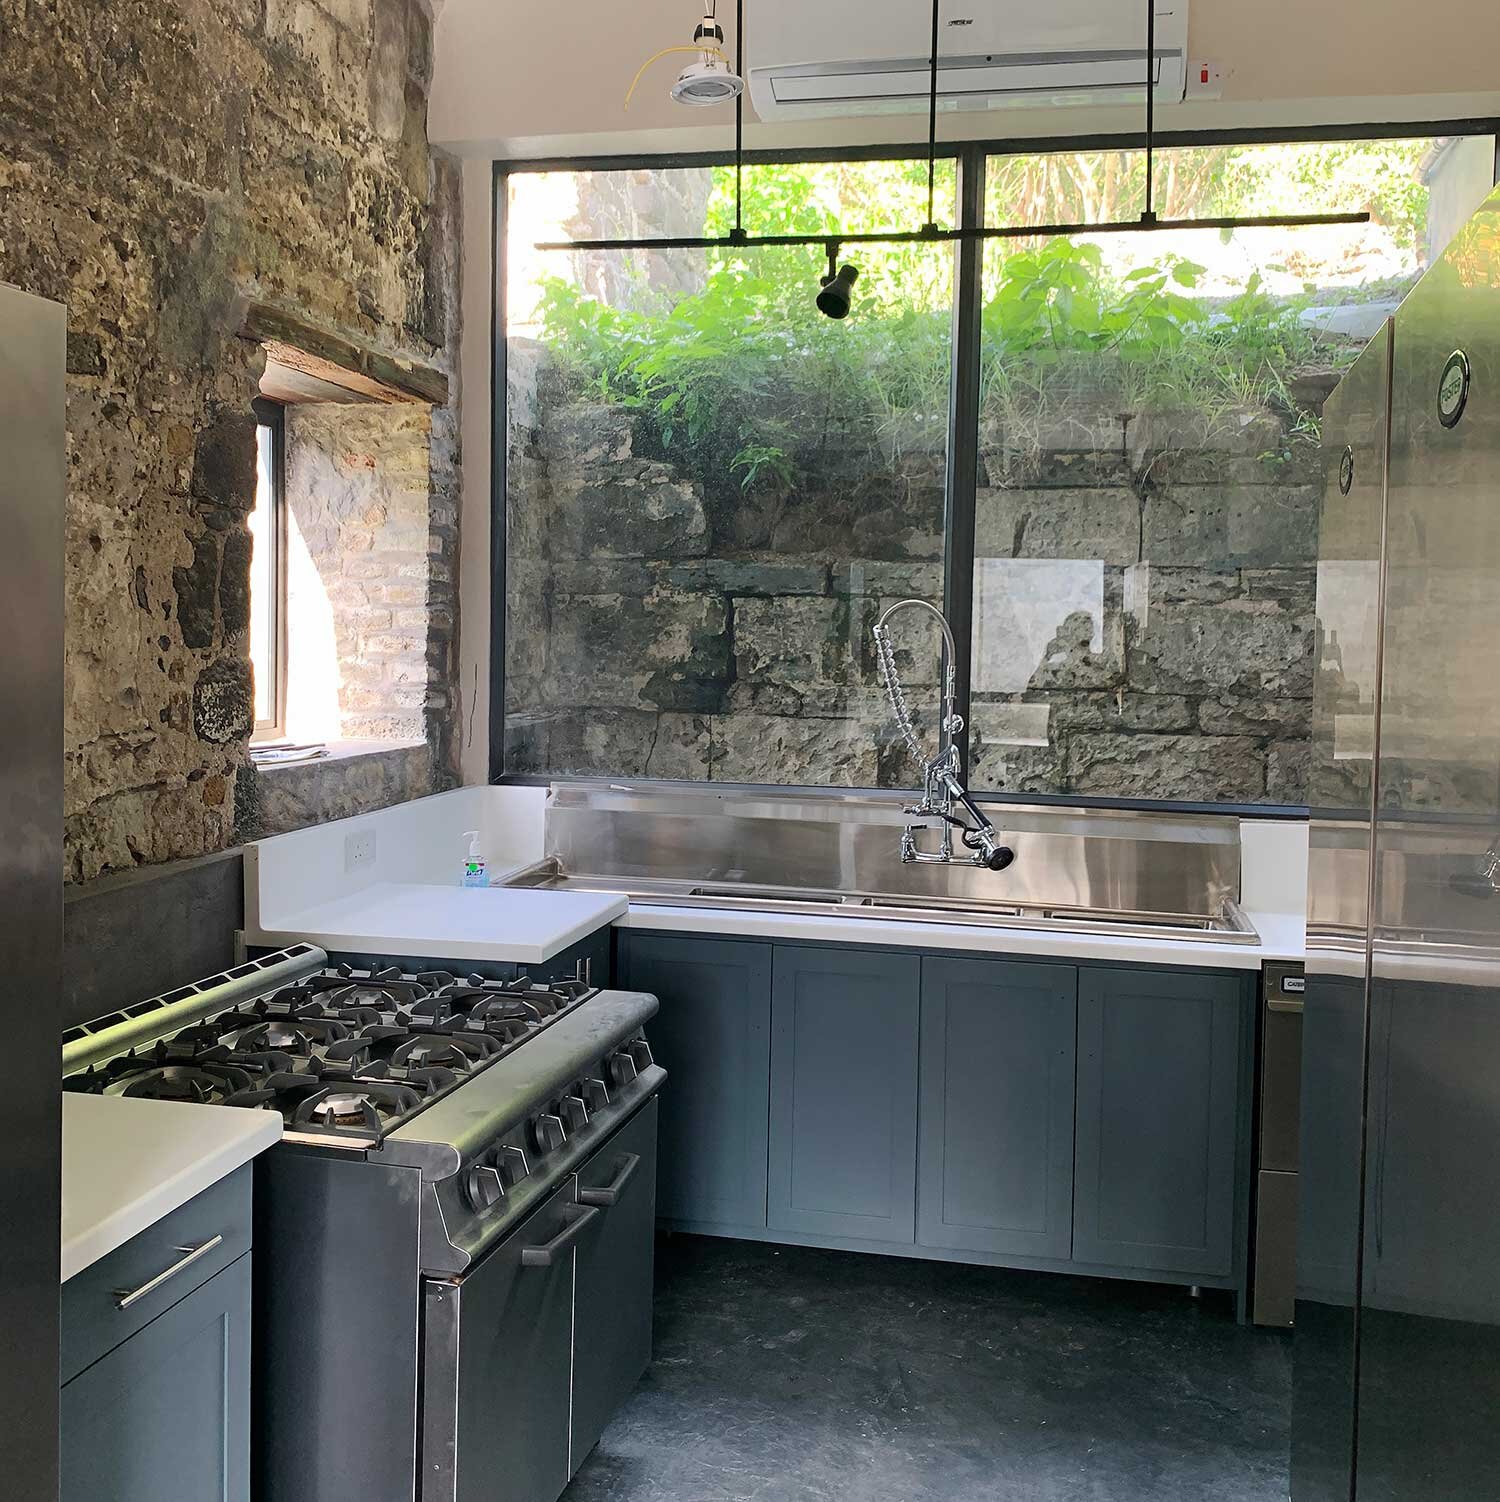 Our kitchen which was designed to feel part of the ruins